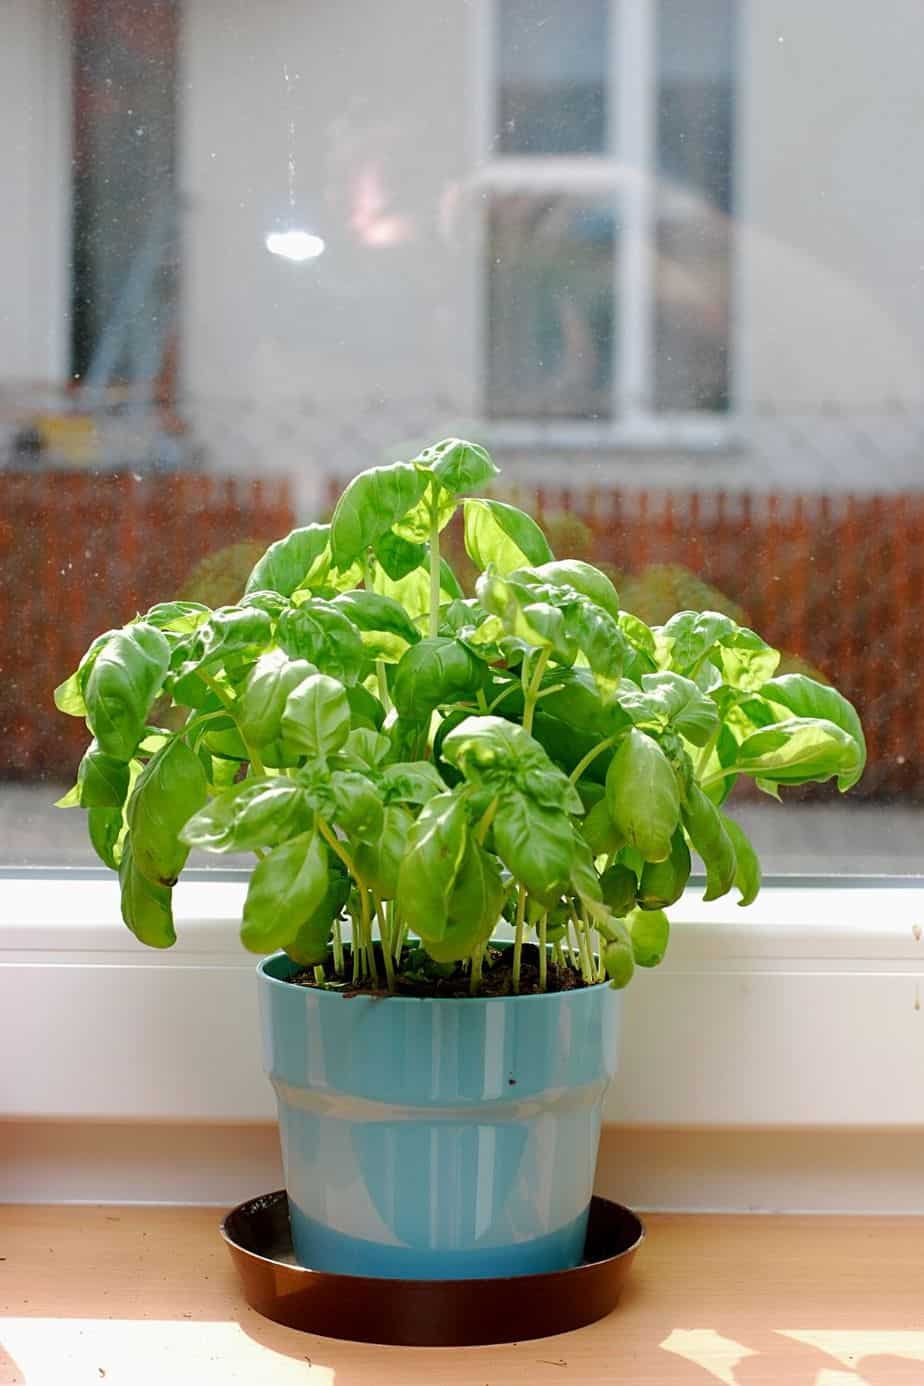 If you want to have a steady supply of Basil in your home, grow this herb in water